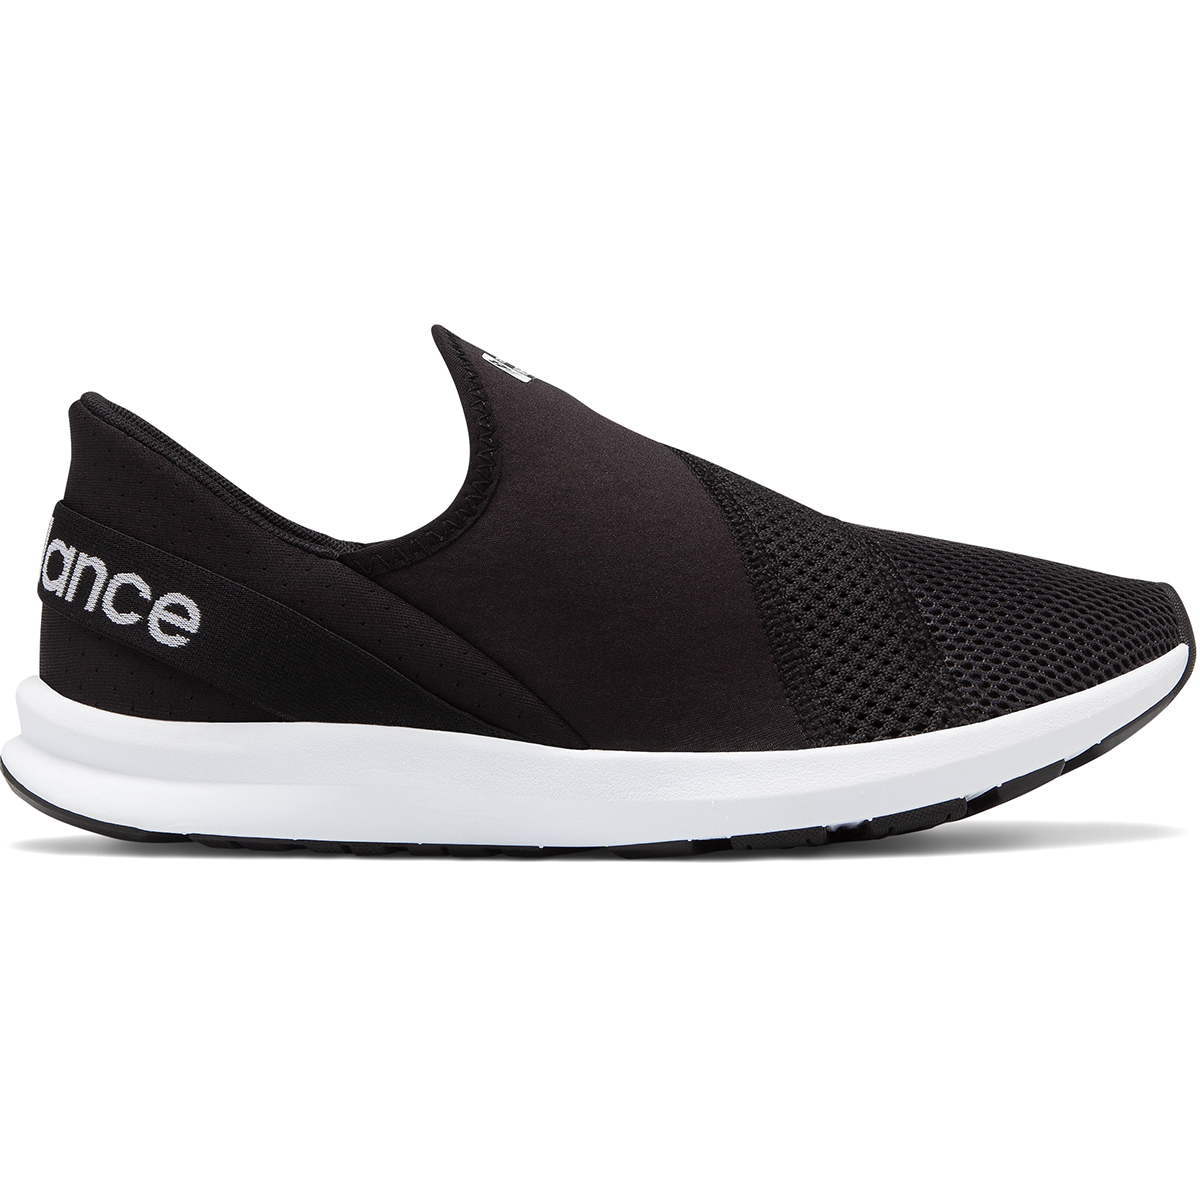 New Balance Women's Fuelcore Nergize Easy Slip-On Shoes - Black, 9.5